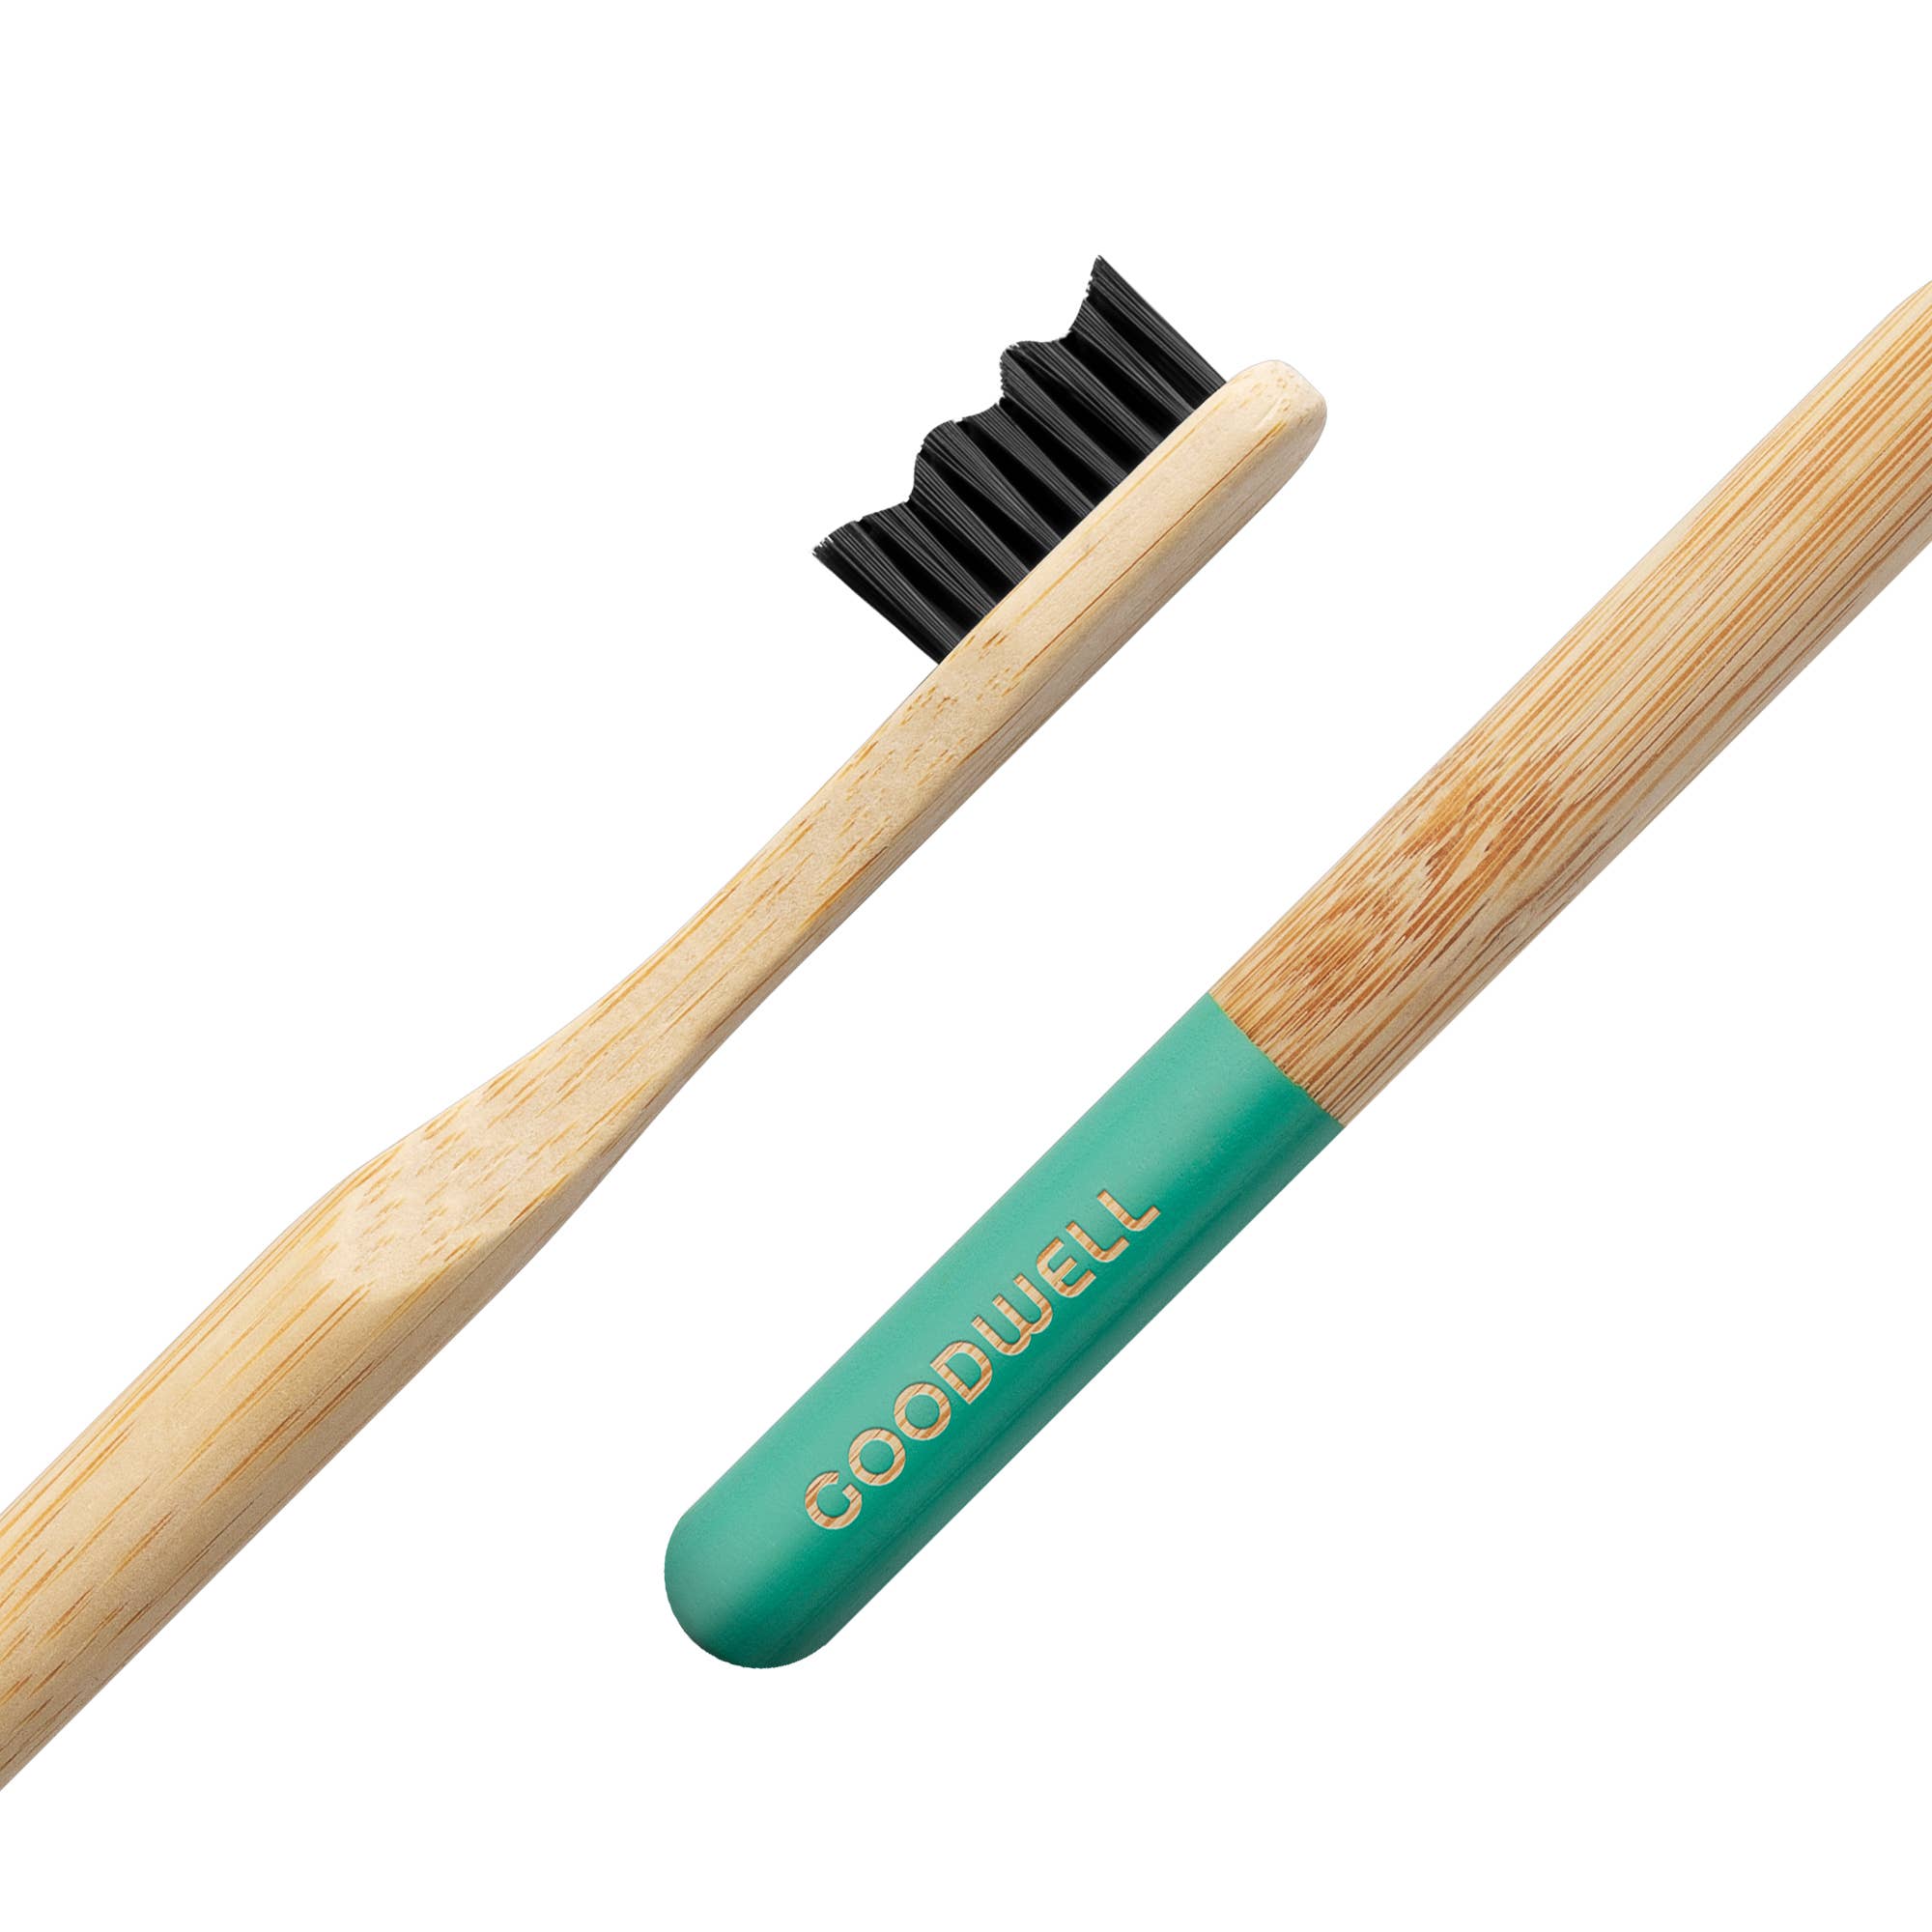 Goodwell Co. - Bamboo Toothbrush (Green)